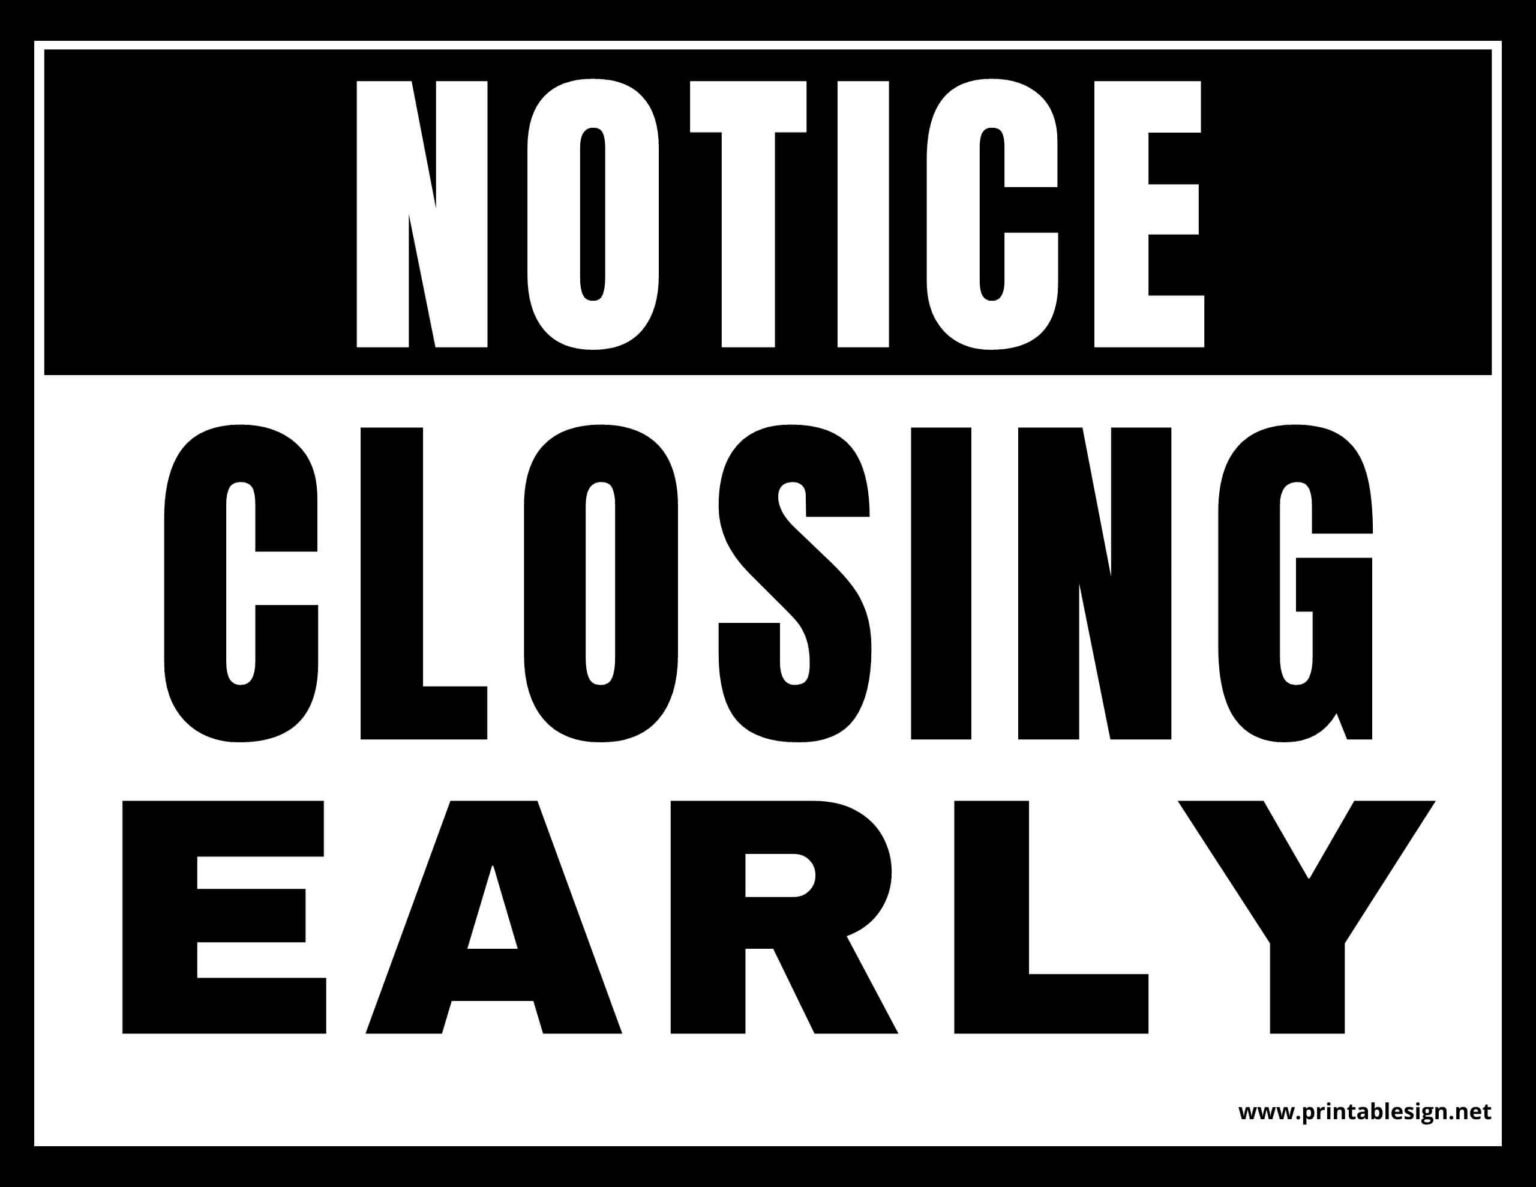 Closing Early Sign Template Free